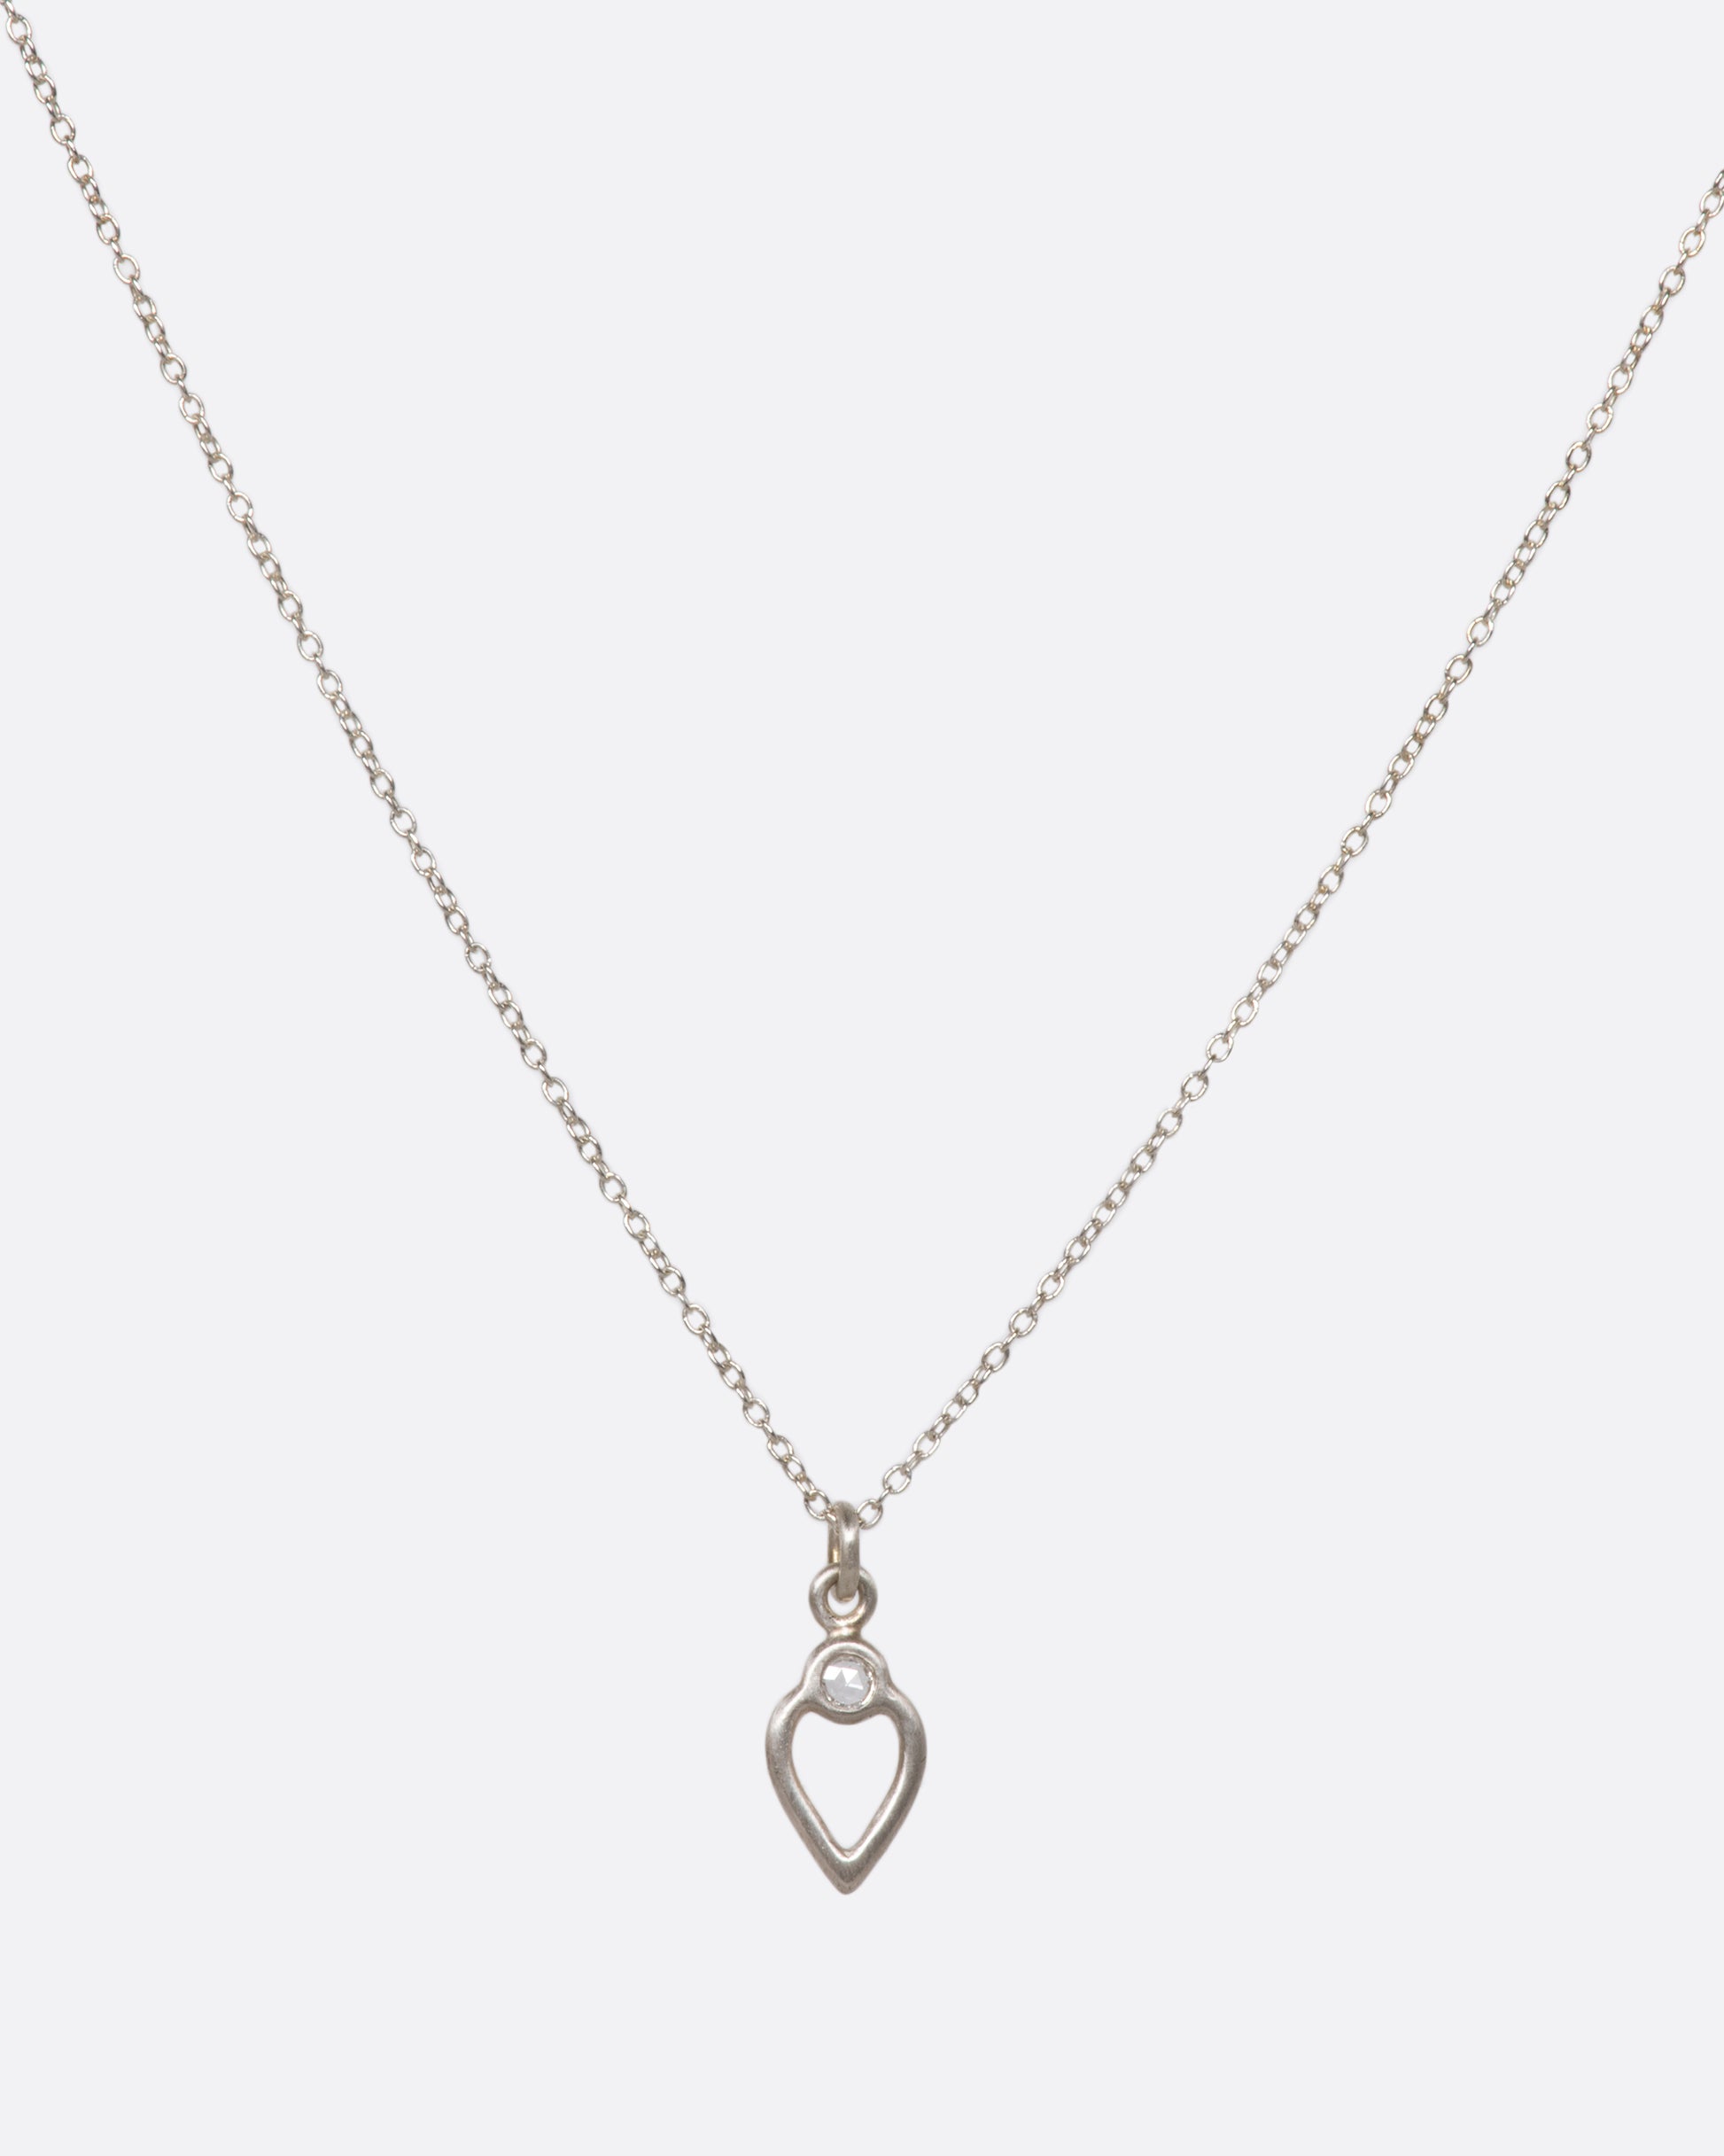 A delicate heart pendant necklace with a rose-cut diamond detail. The perfect piece if you're looking for something simple and unique to wear daily.